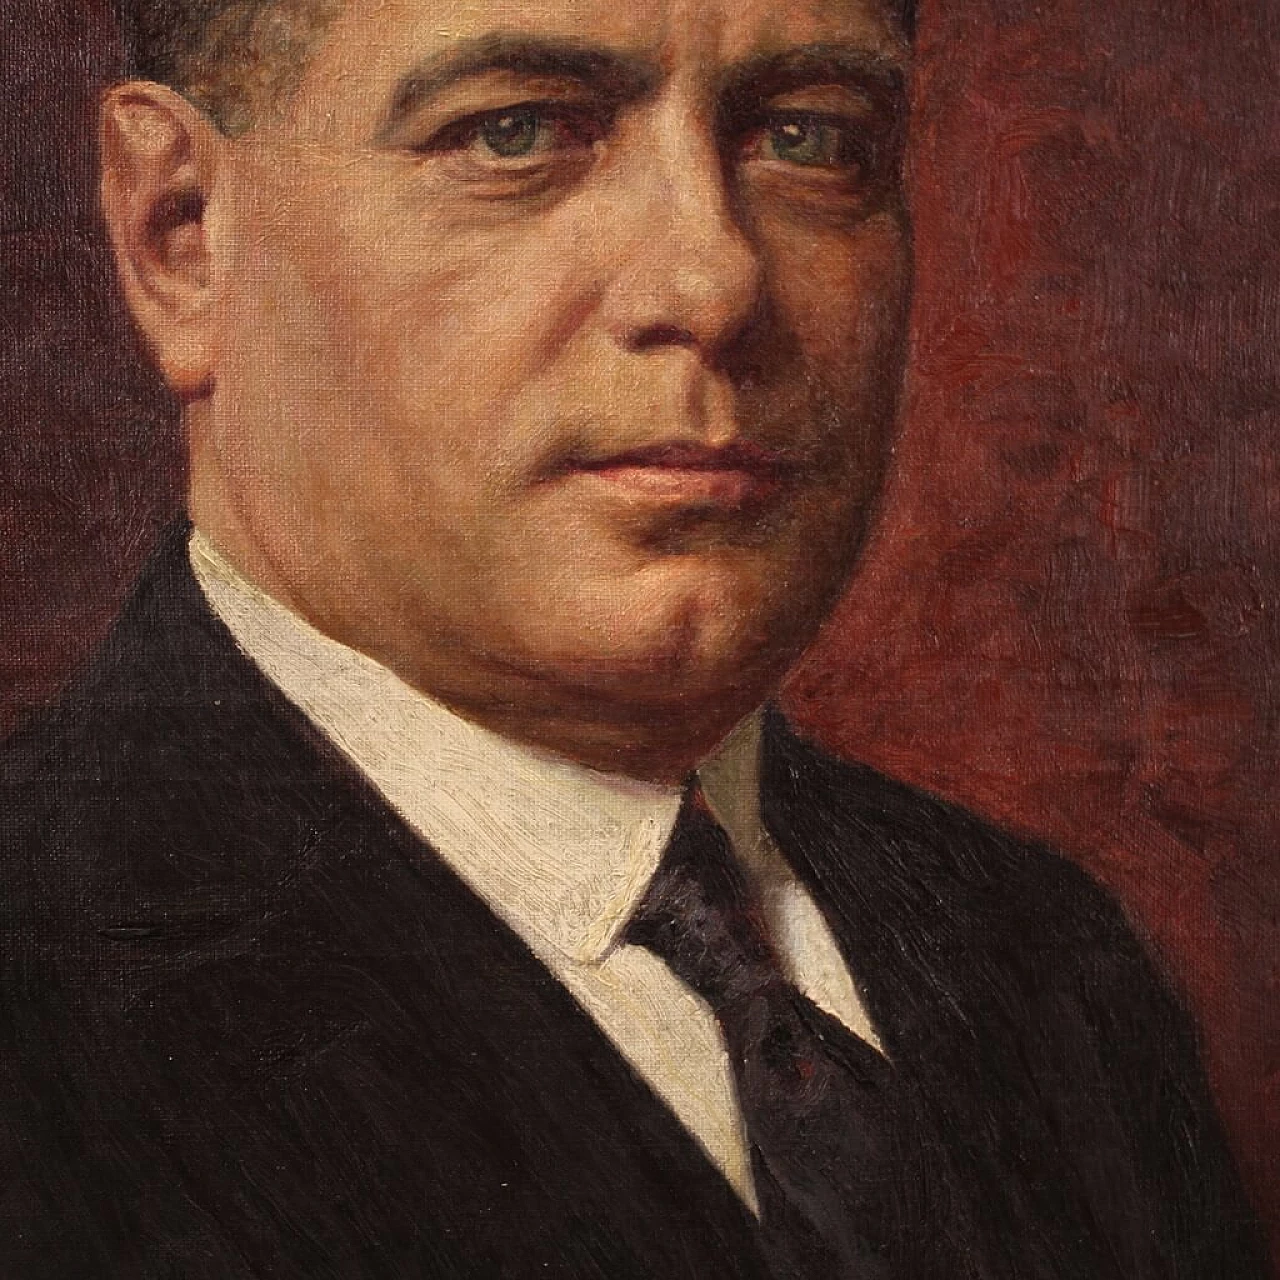 Angelo Garino, male portrait, oil painting on canvas, 1931 5